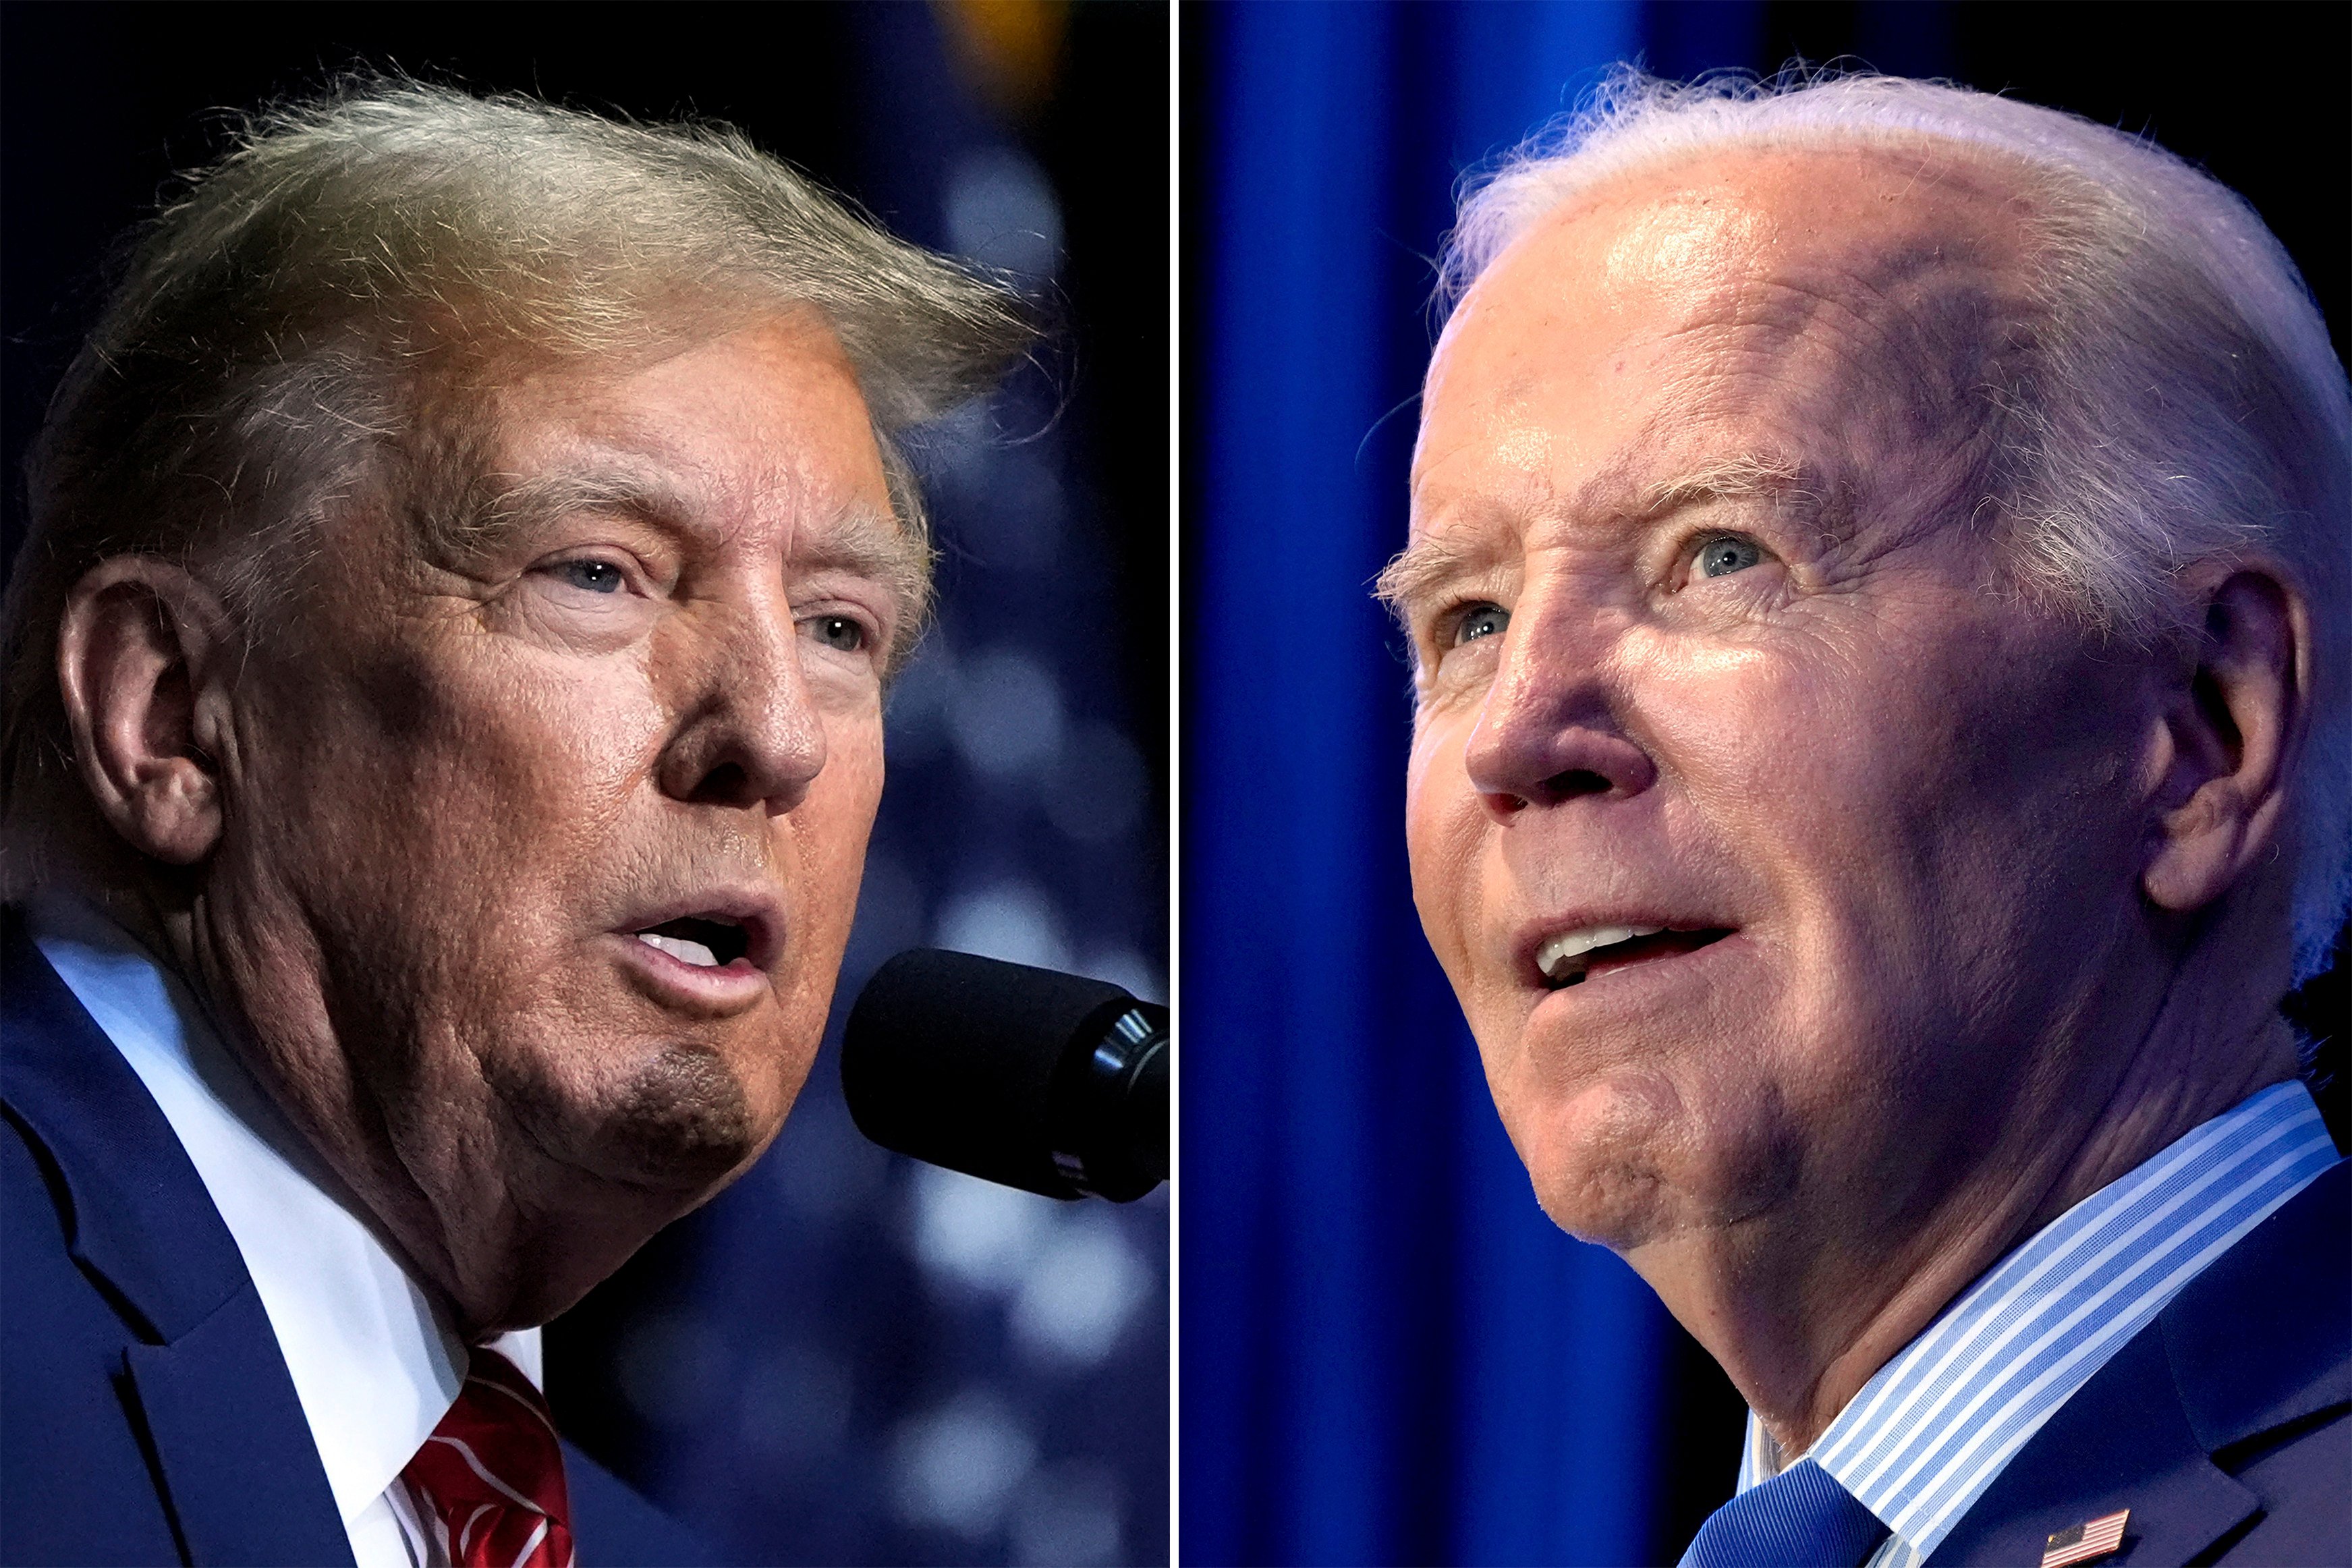 Donald Trump accused Democratic rival President Joe Biden of running a ‘Gestapo administration’ in a private address to donors. Photo: AP